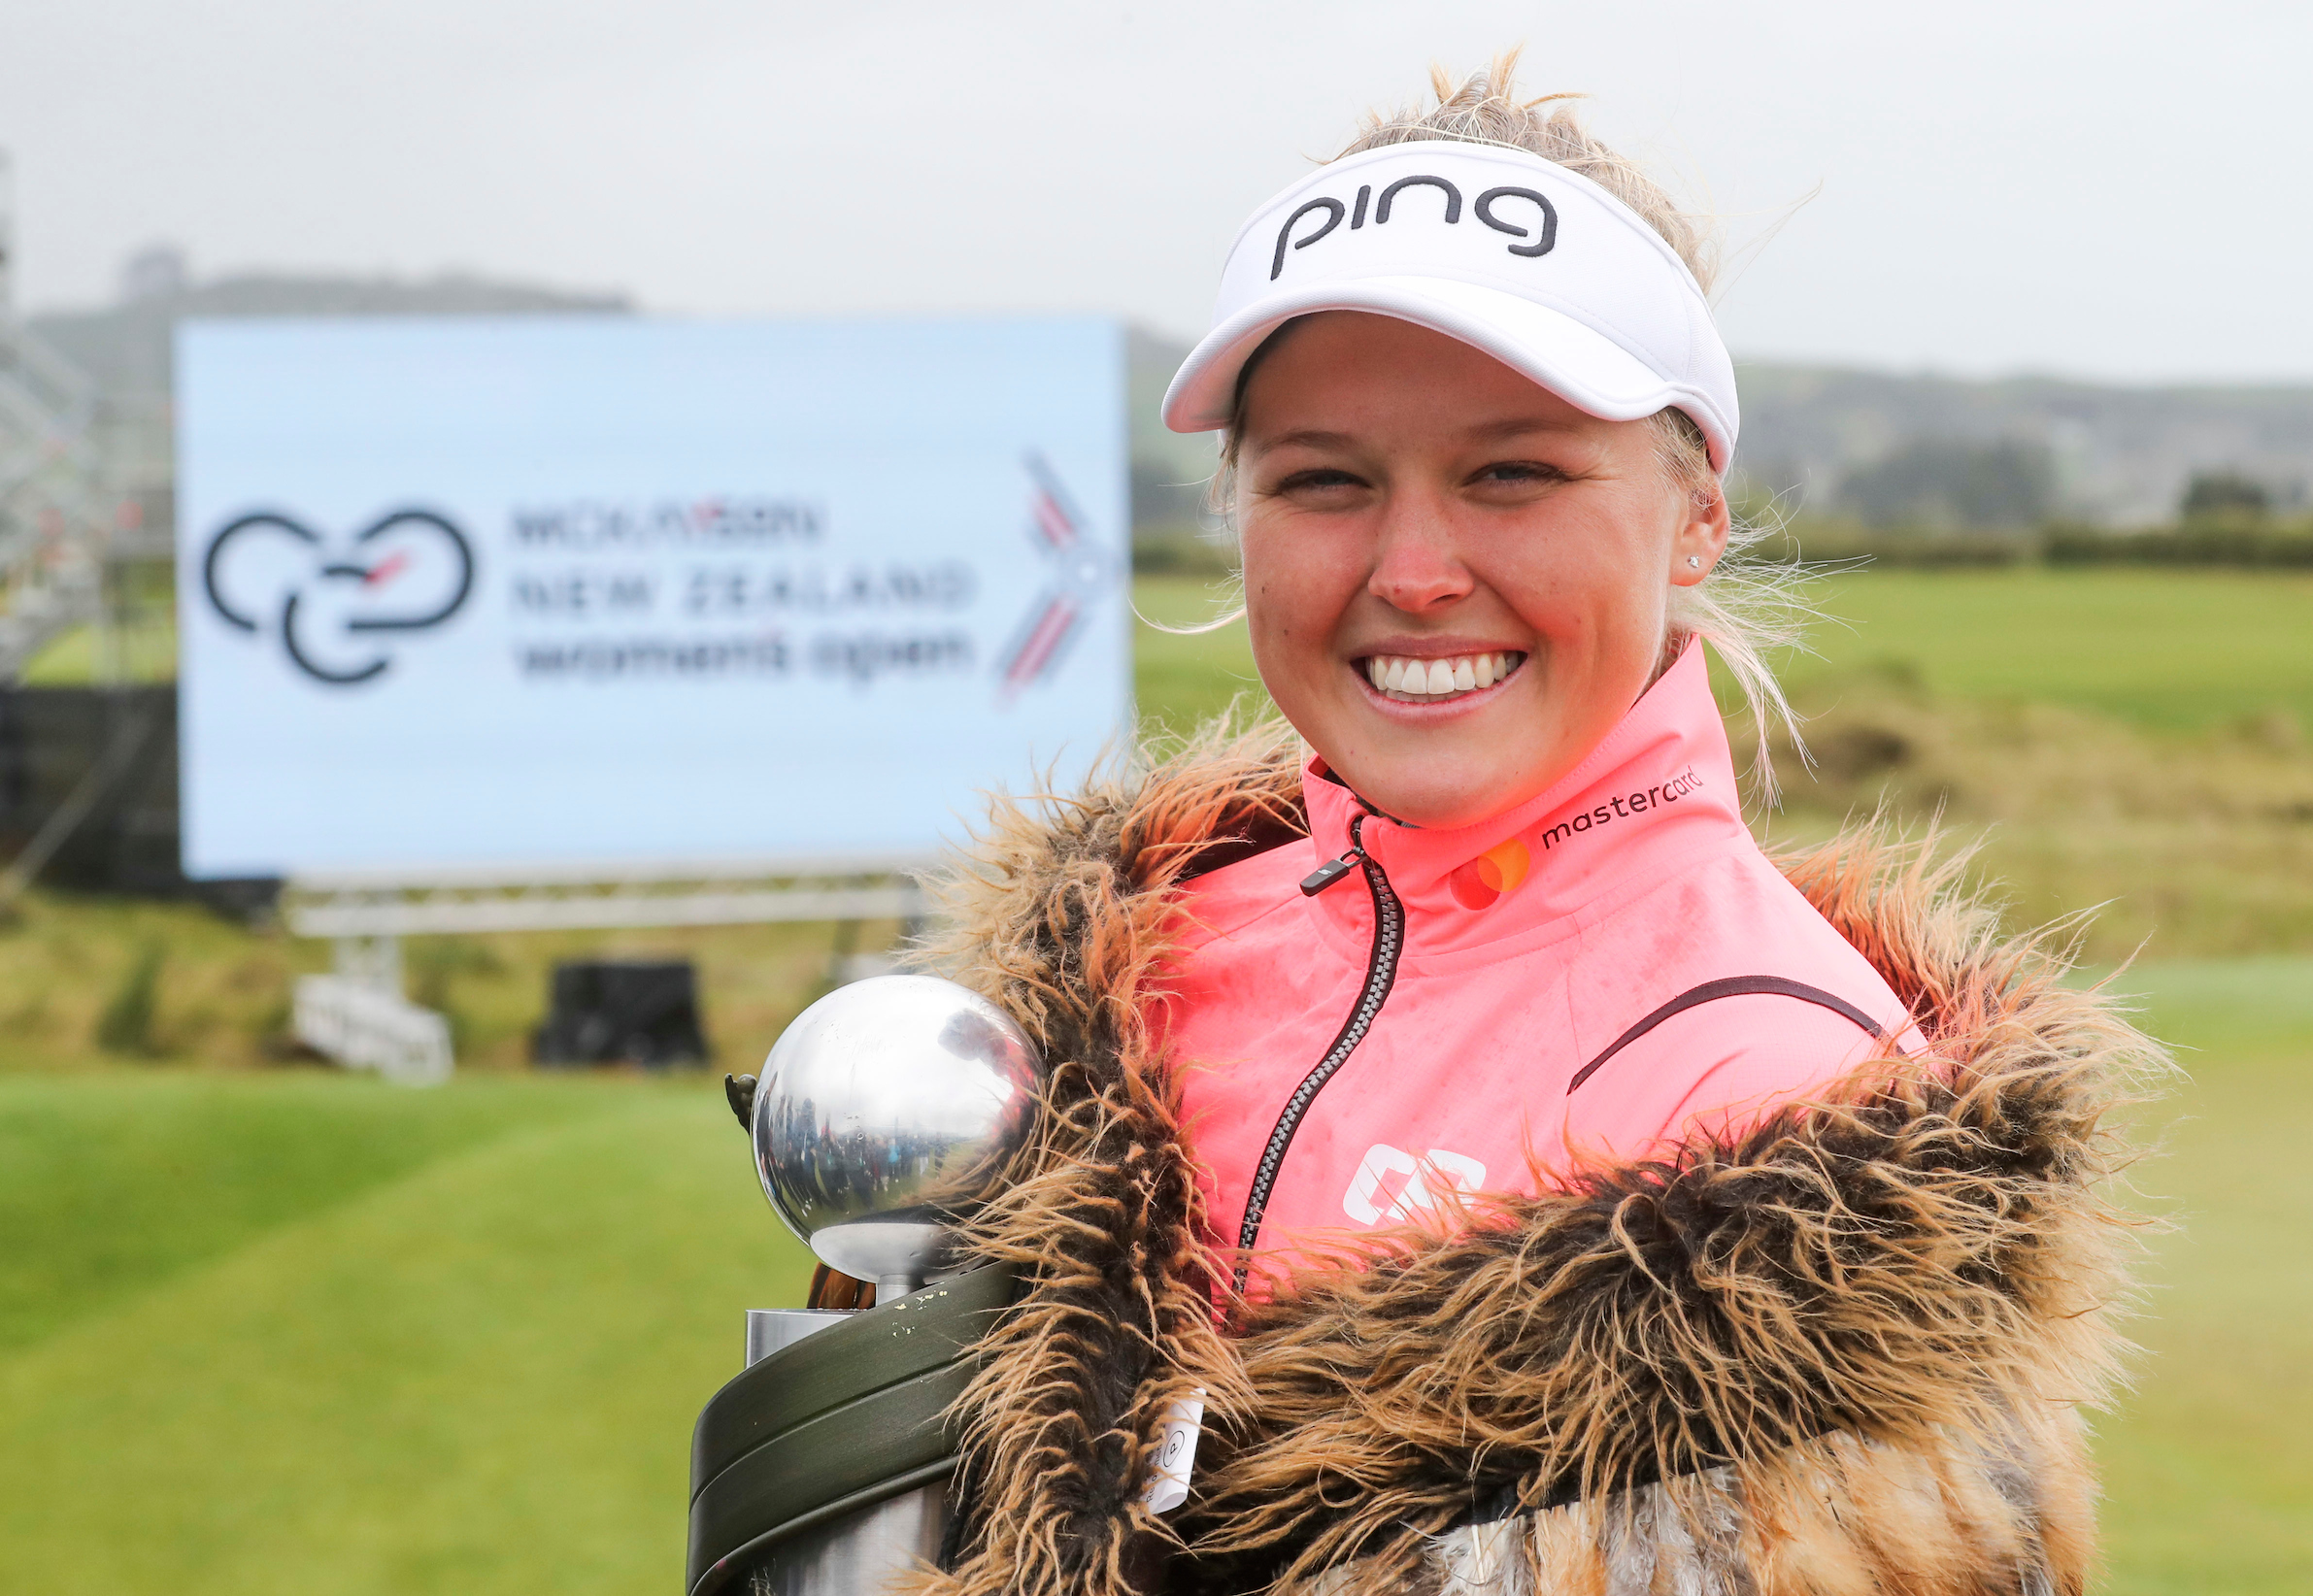 Inaugural champion Canada's Brooke Henderson with the trophy. McKayson NZ Women's Open 2017. LPGA Tour. Windross Farm, Auckland, New Zealand. Monday 02 October, 2017. Copyright photo: John Cowpland / www.photosport.nz